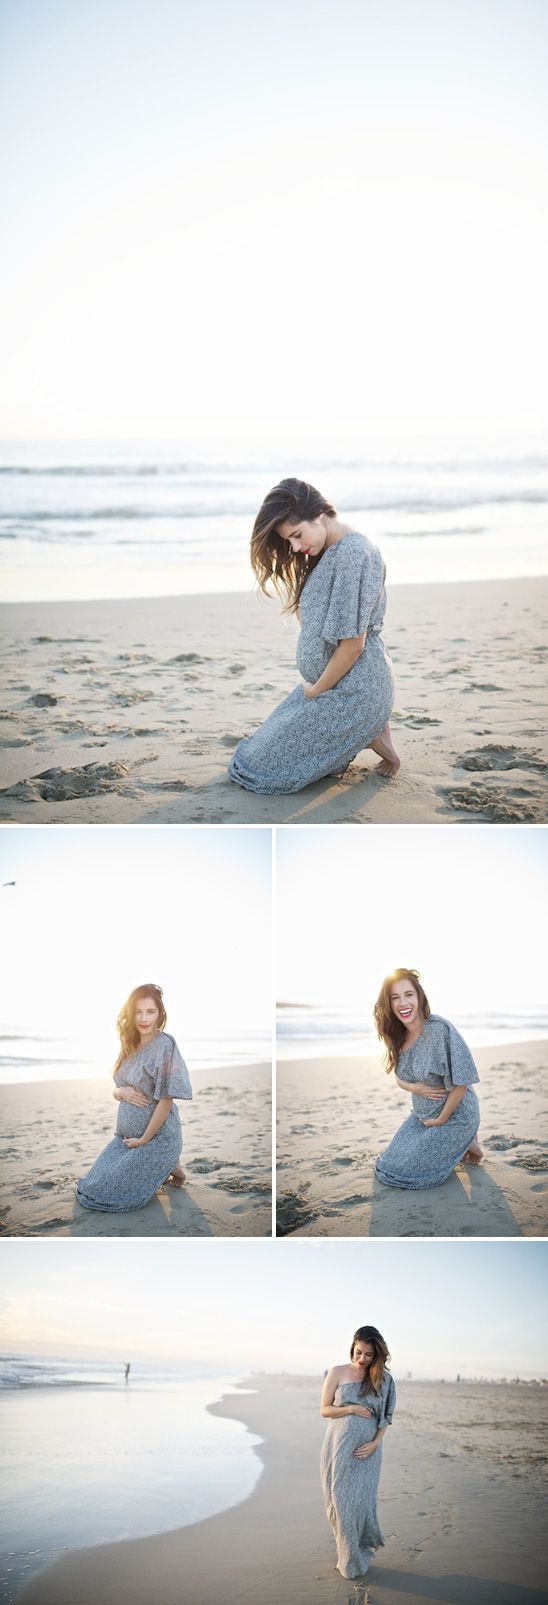 LOVE. I would die to have pictures like this at the beach. Hate the dress though